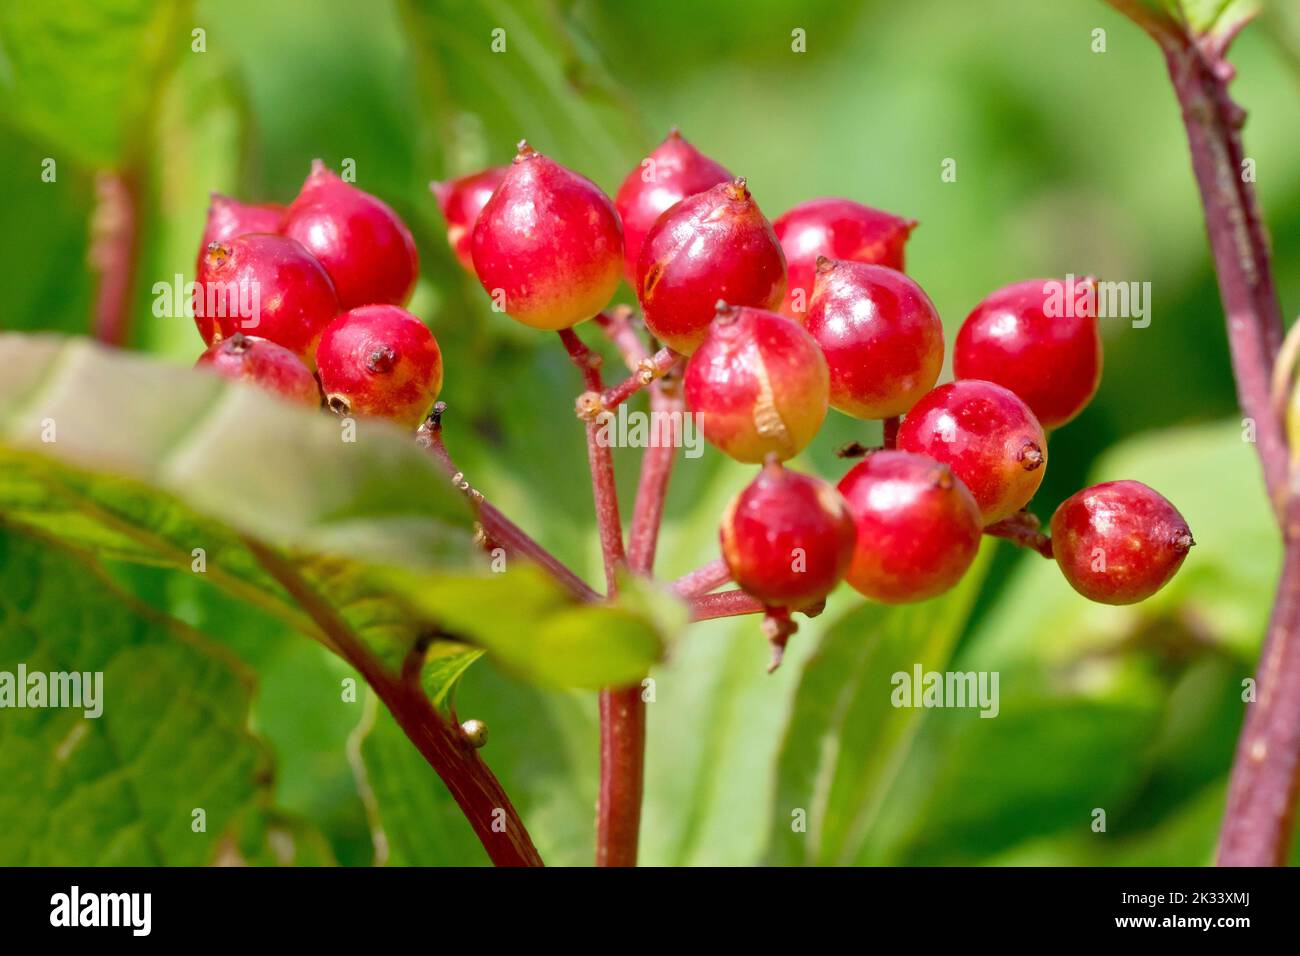 Guelder Rose (viburnum opulus), close up of the red berries or fruits that adorn the shrub in autumn. Stock Photo